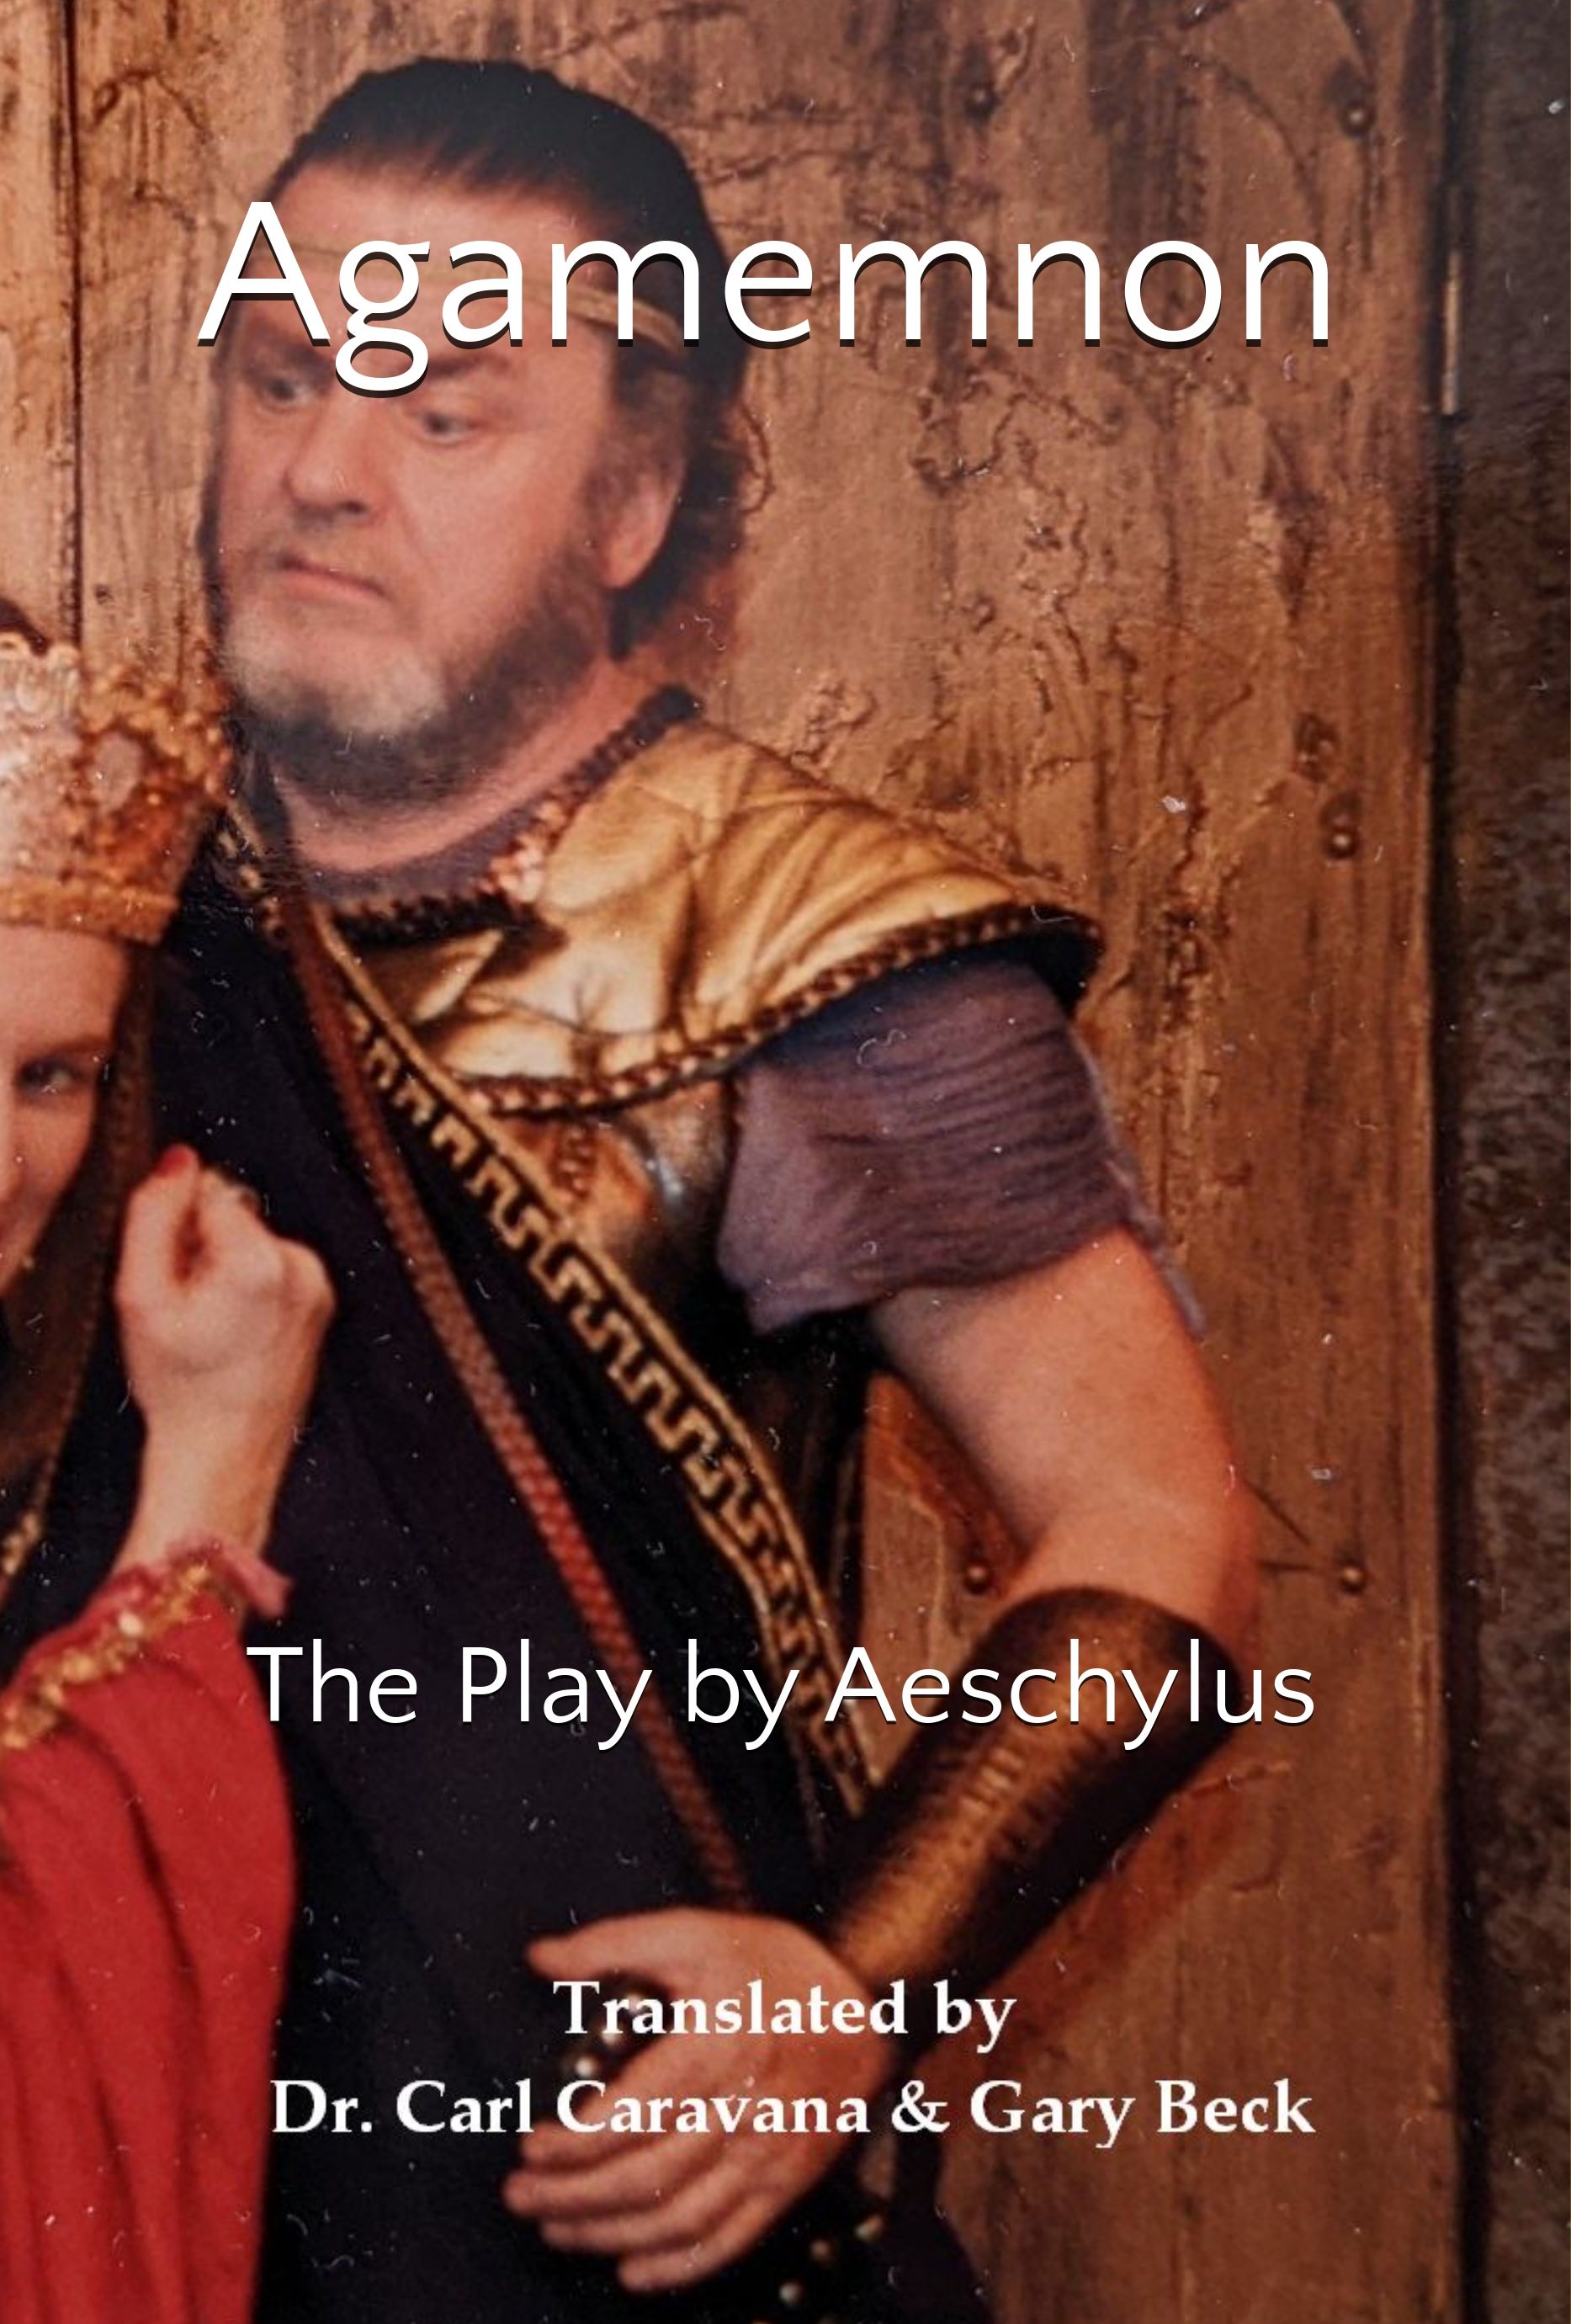 Agamemnon - The Play by Aeschylus